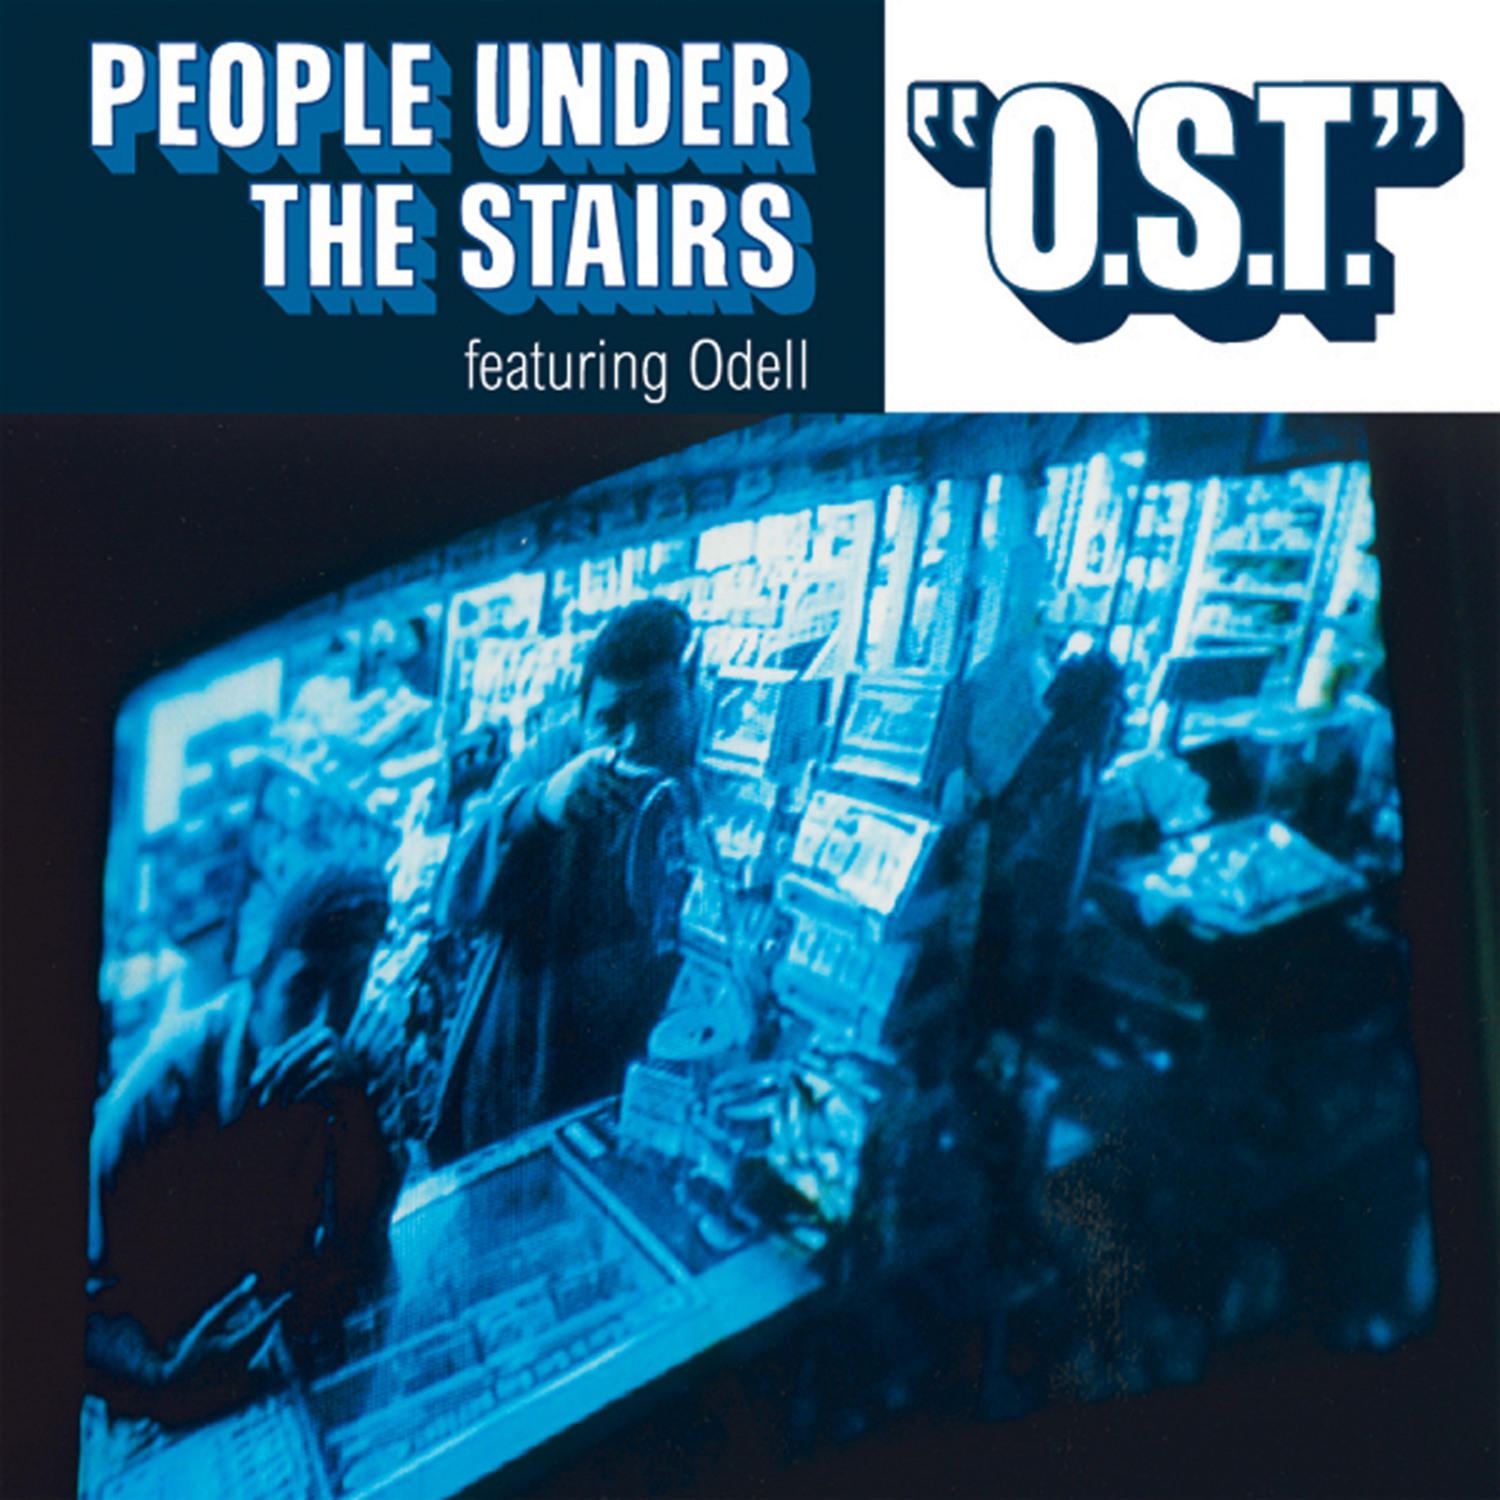 People Under The Stairs - "O.S.T." (feat. Odel)